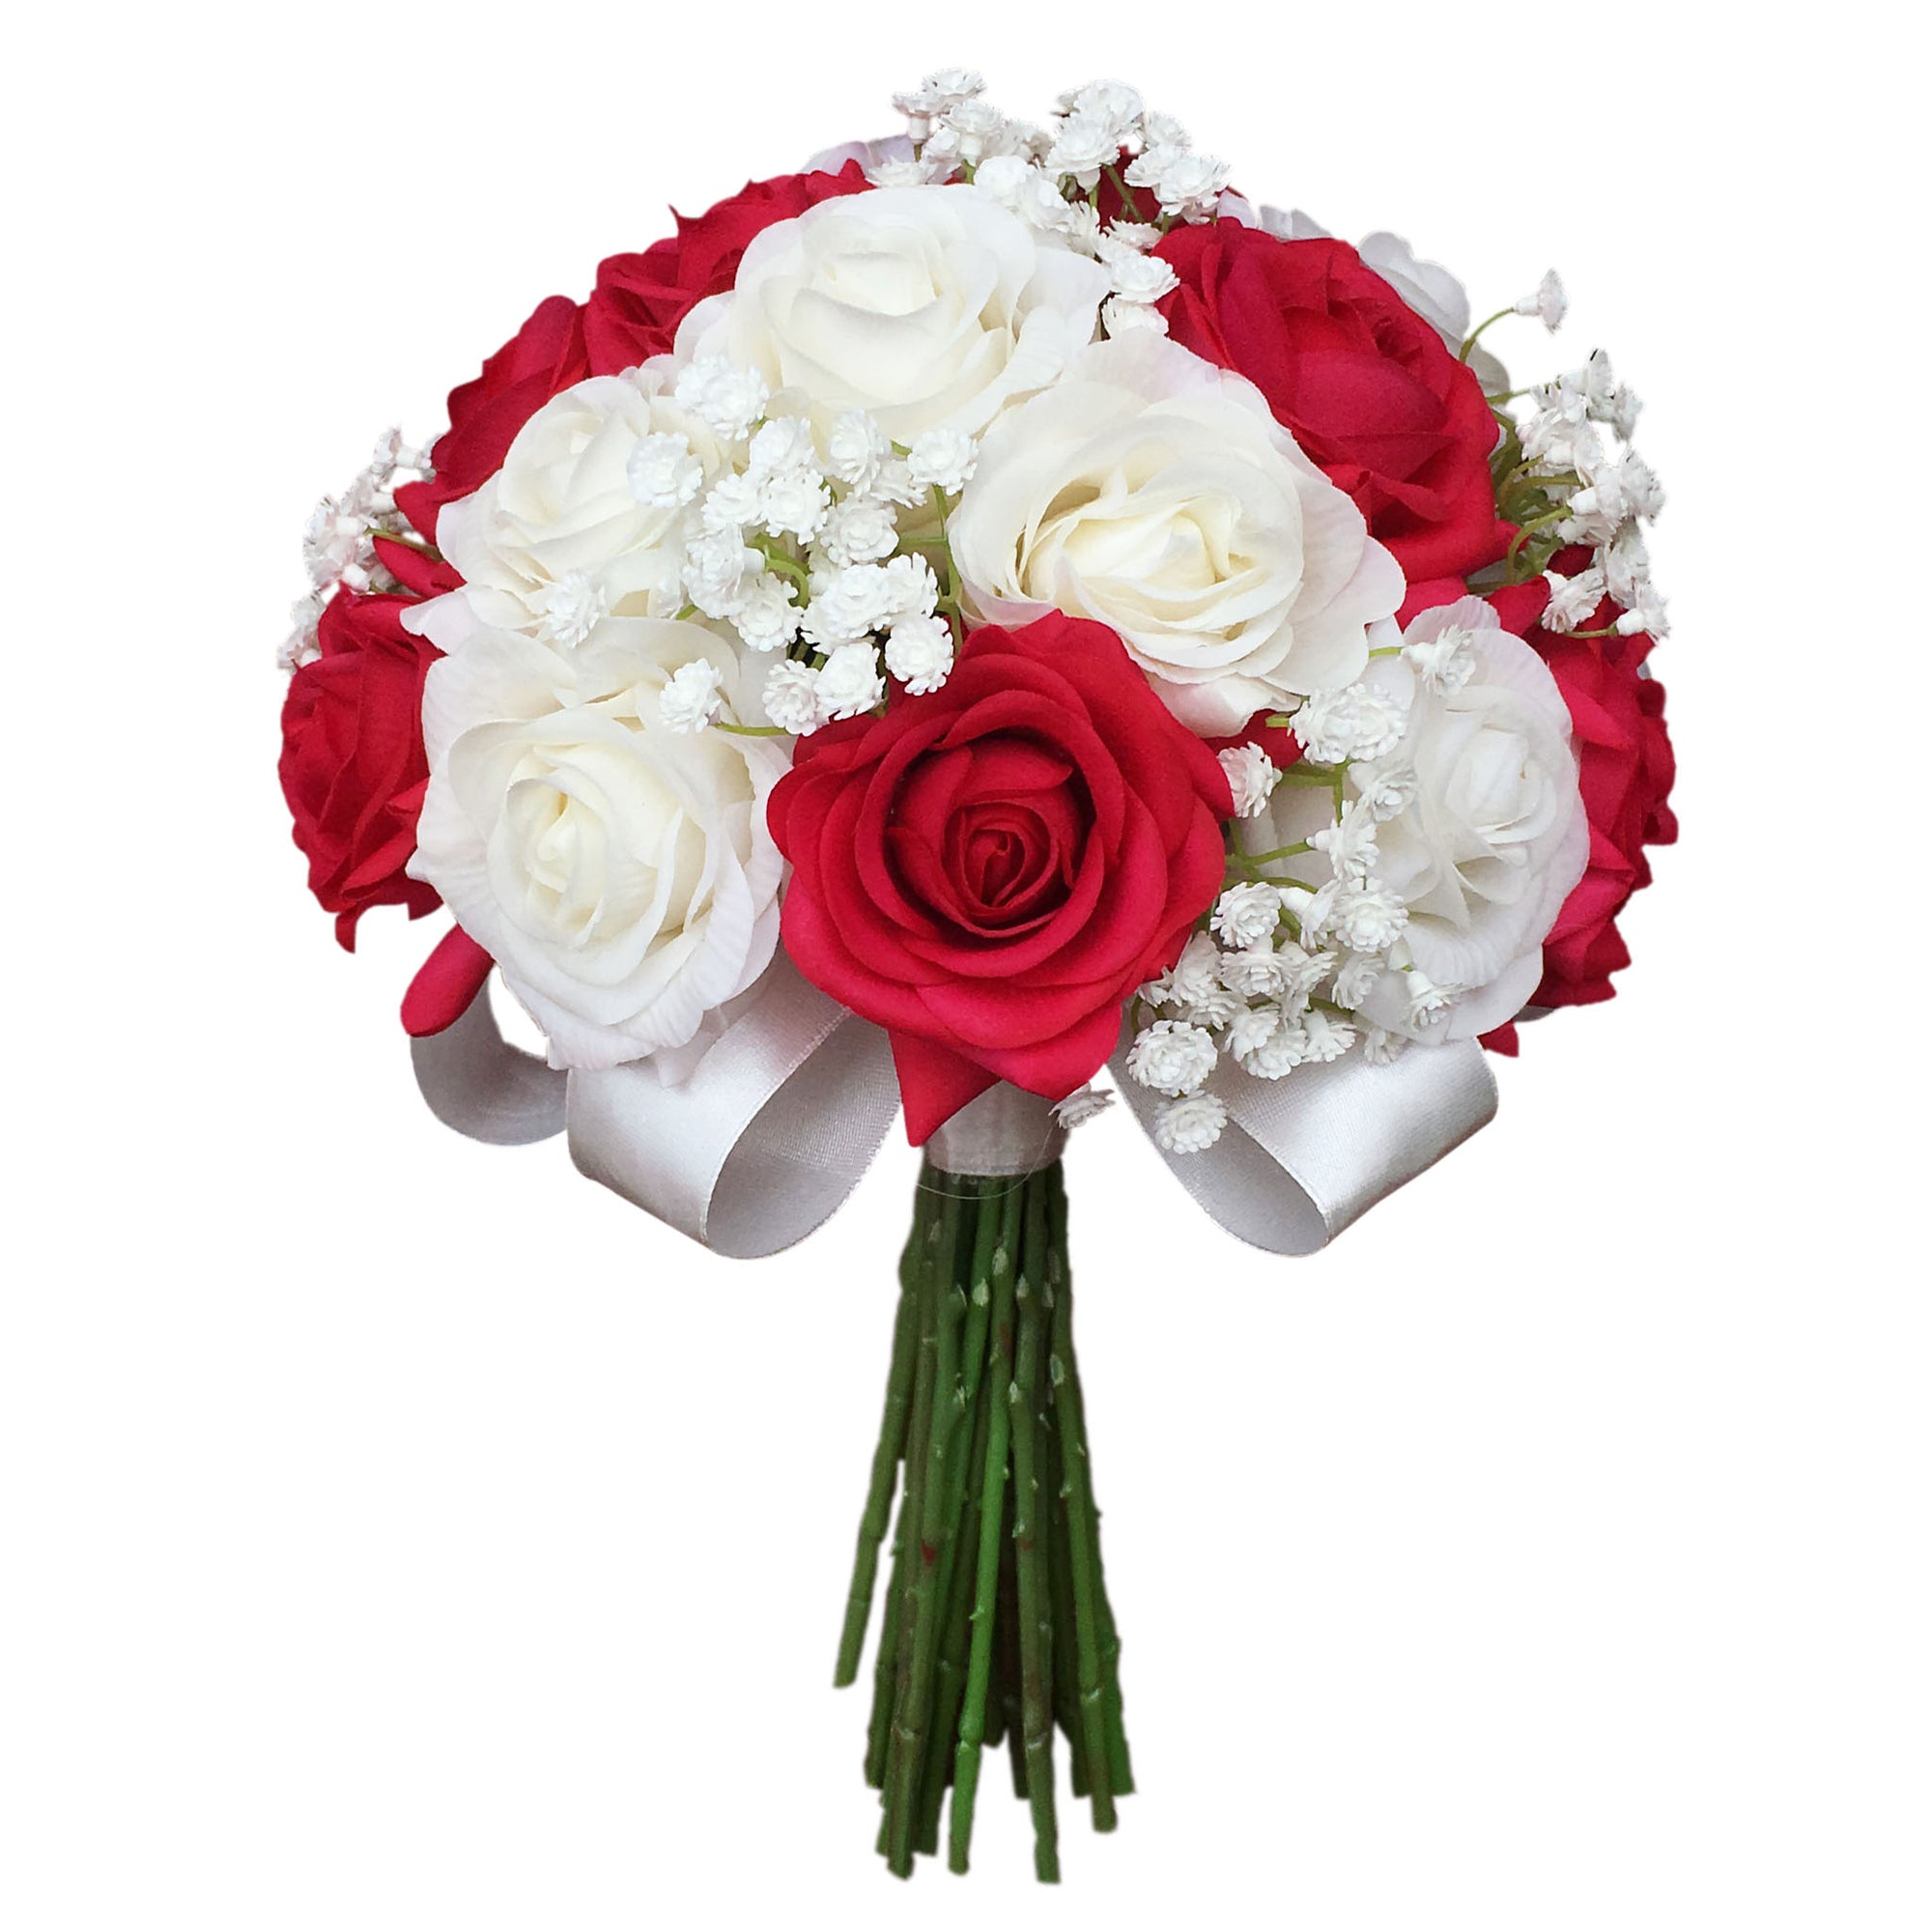 White and Fuchsia Bridal Flower Bouquet with Babys Breath